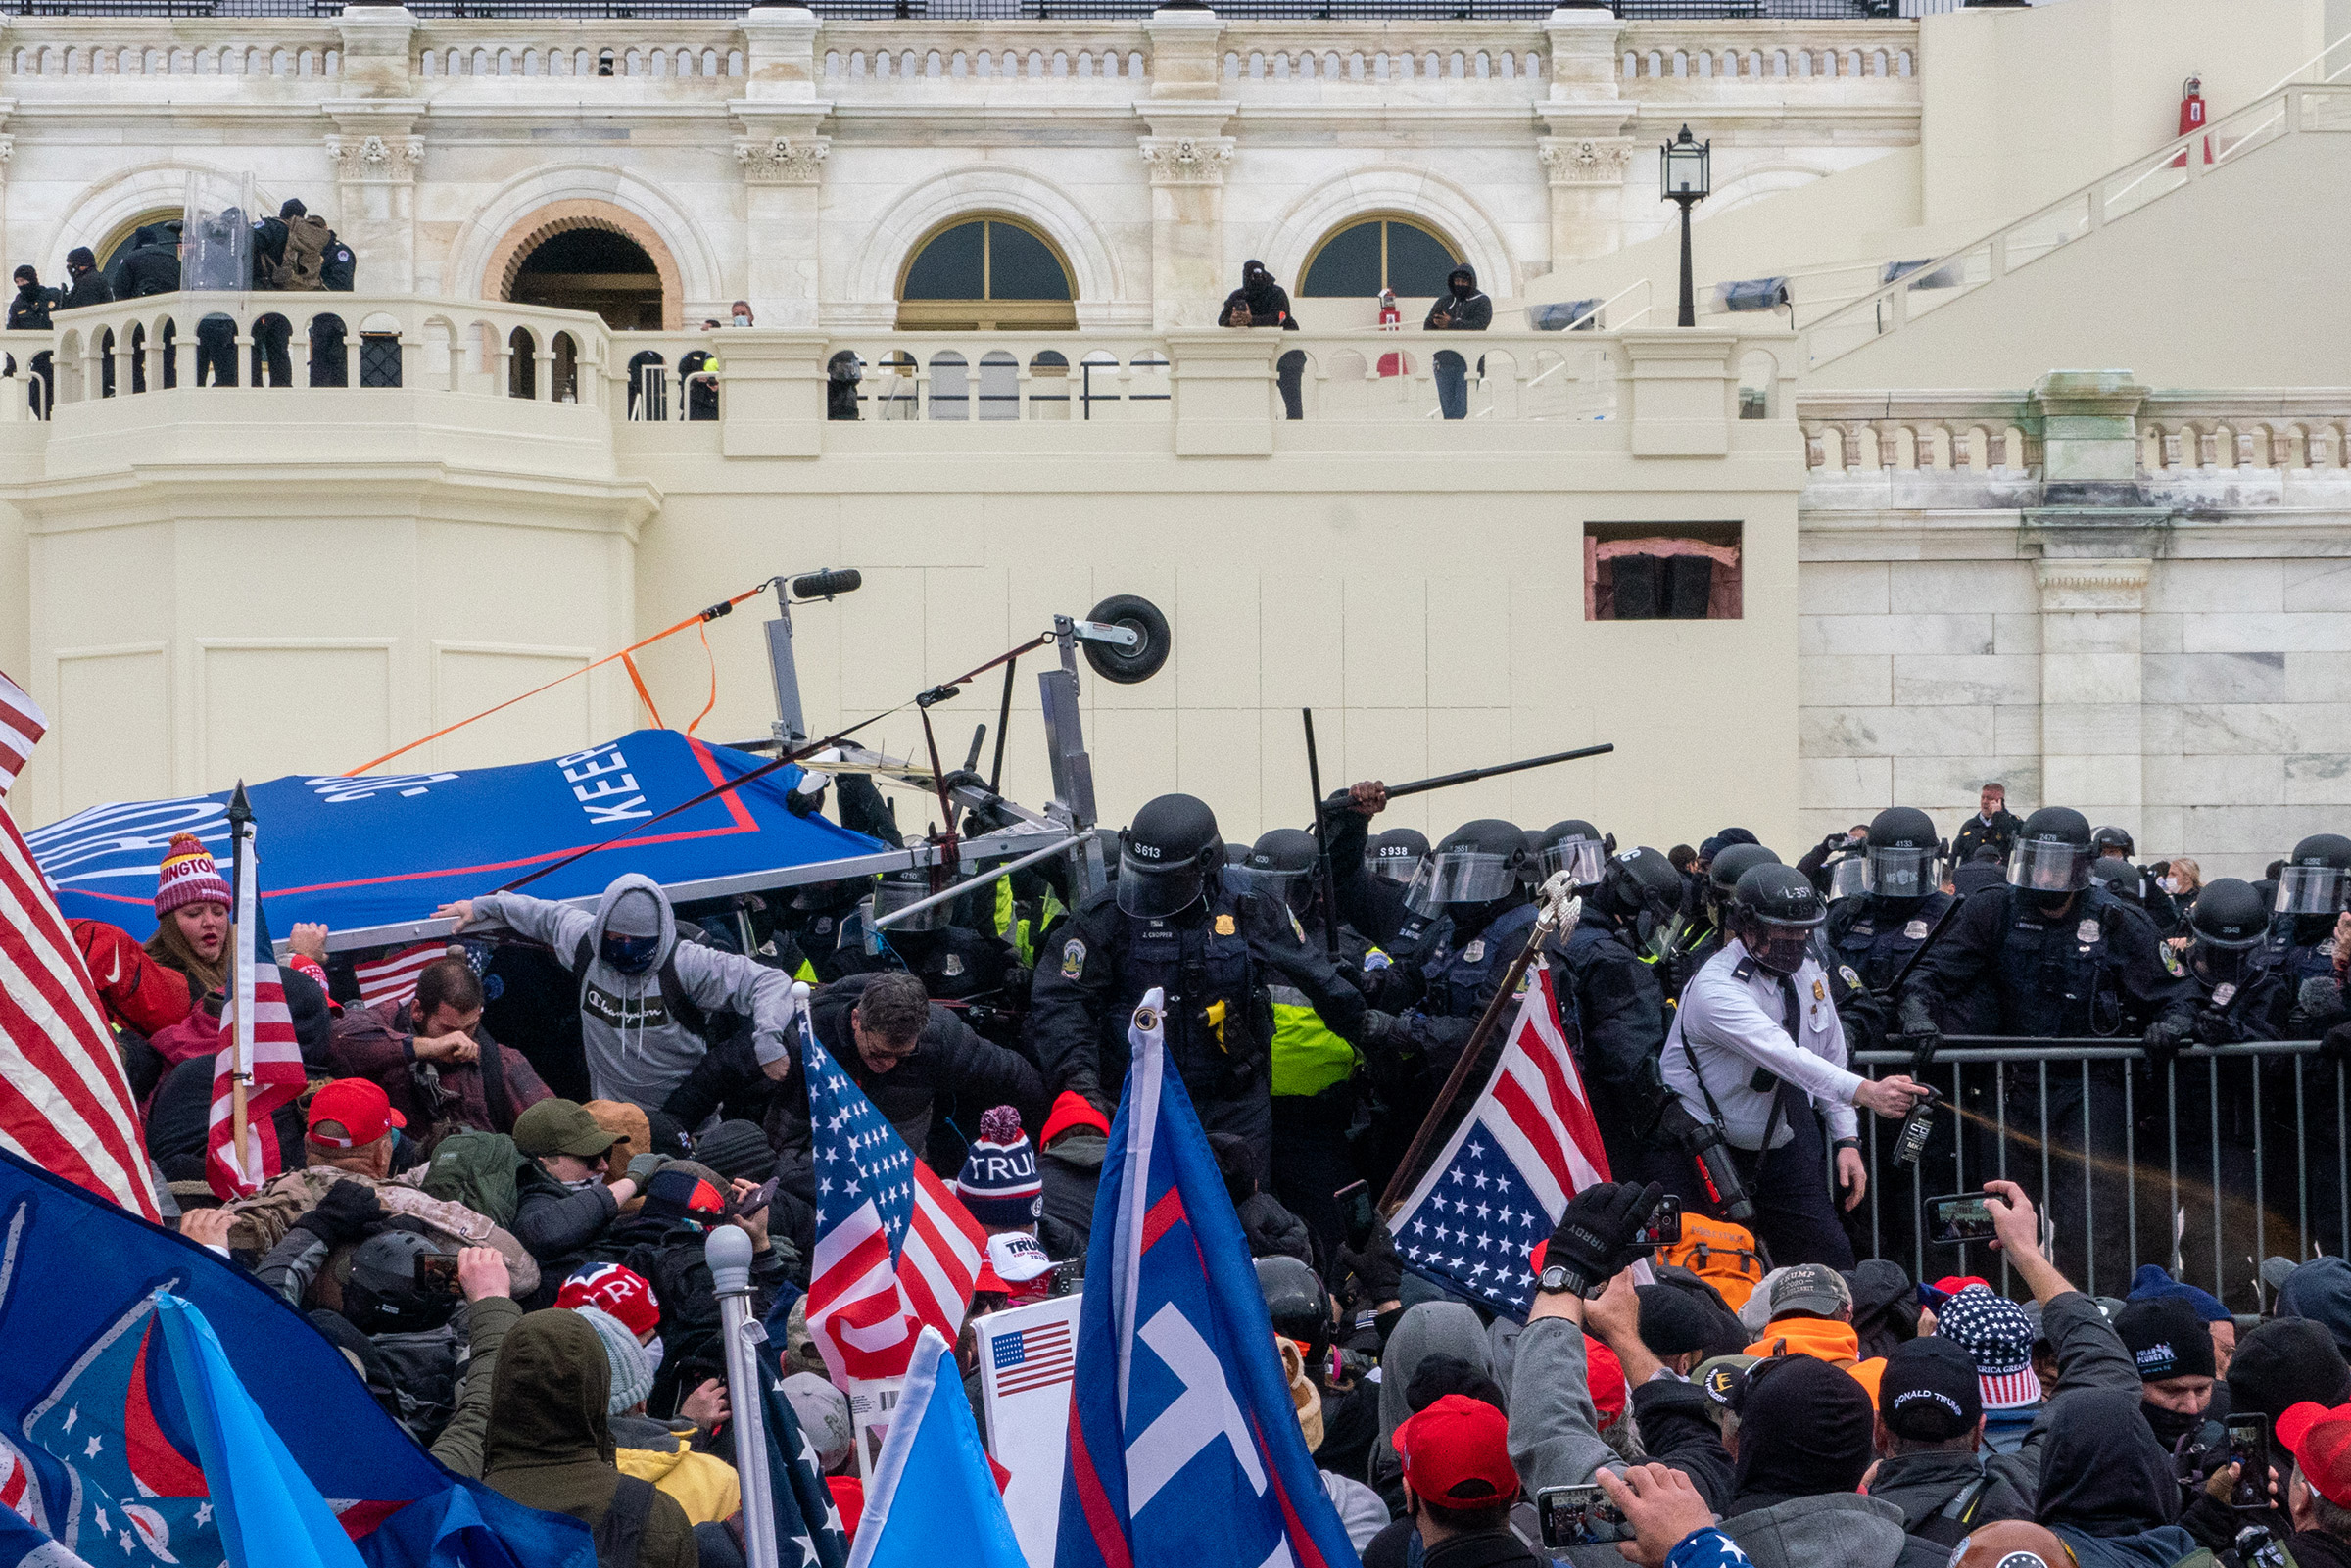 2020.Washington DC. USA. Protestors clash with police before gaining entry to the capitol. Following an inflammatory speech by President Trump, protestors objecting to the certification of Joe Biden by Congress storm the Capitol. They were briefly blocked by police before gaining entry, and wreaked havoc before being expelled with few arrests. One protestor was shot and killed.